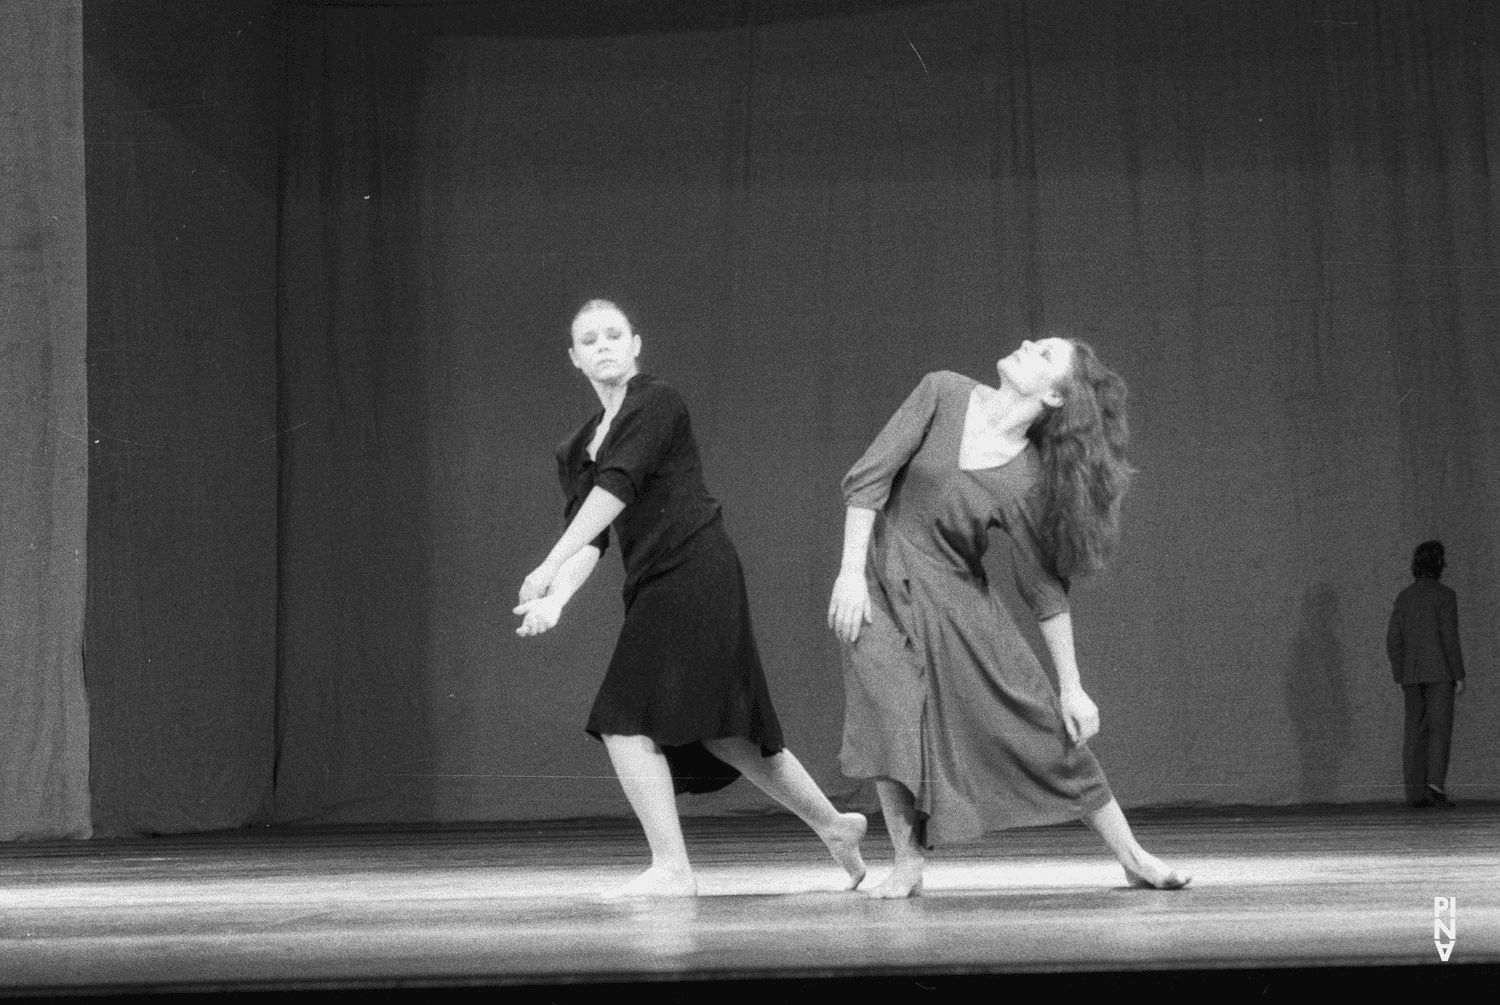 Josephine Ann Endicott and Malou Airaudo in “Adagio – Five Songs by Gustav Mahler” by Pina Bausch